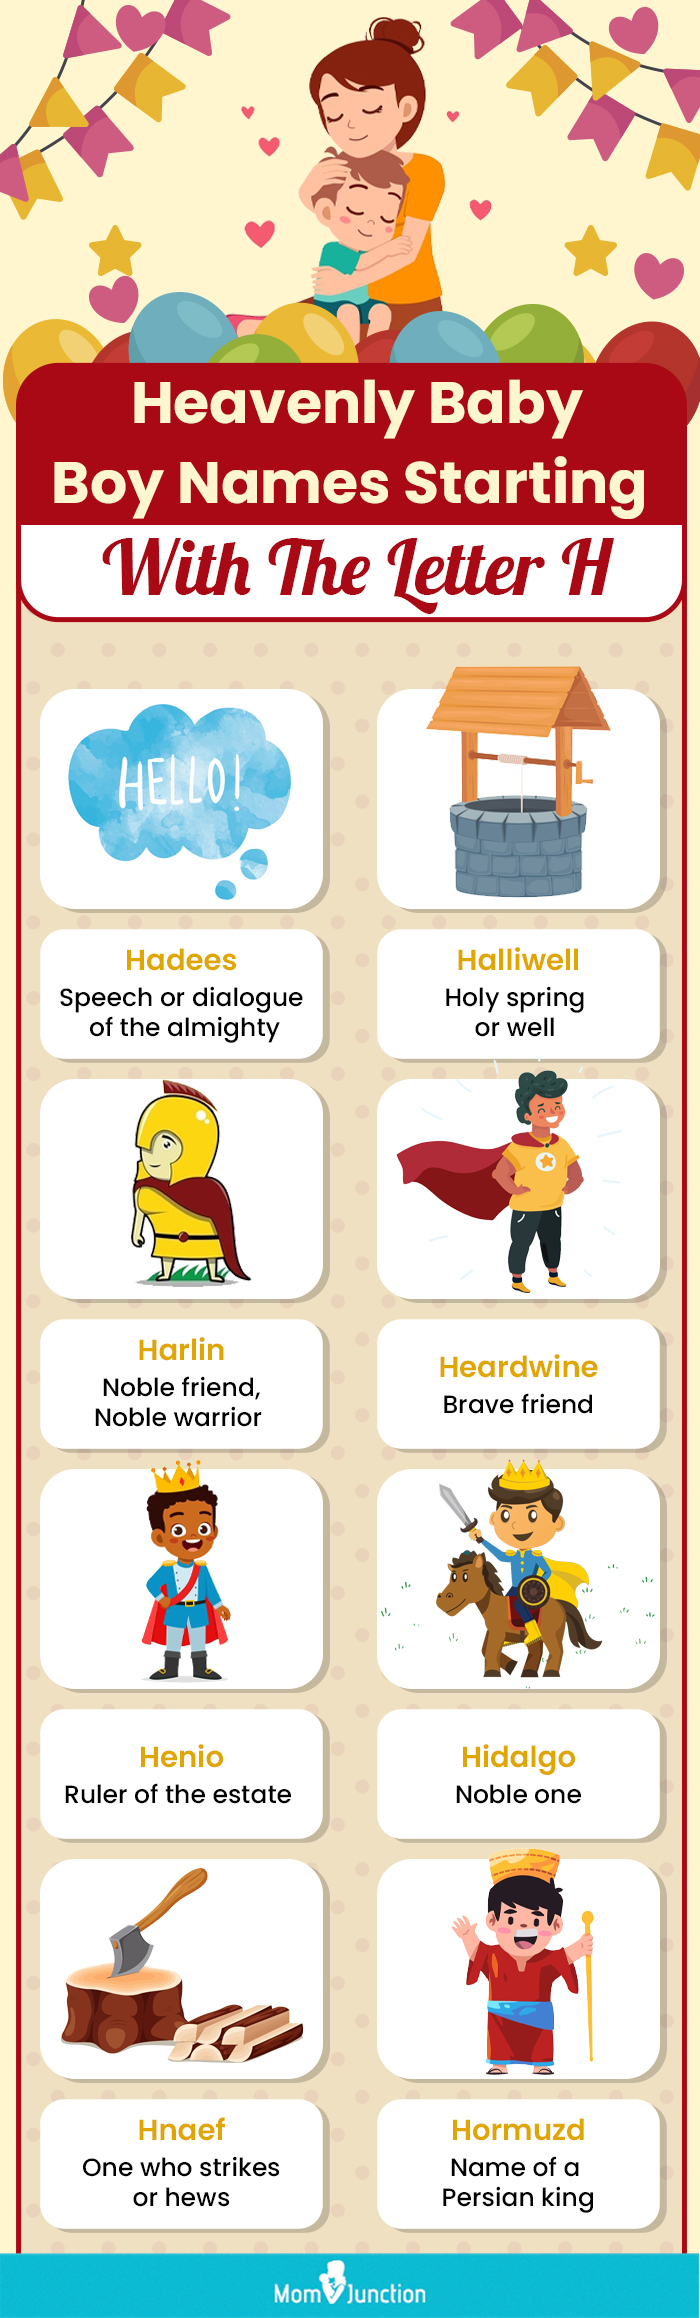 heavenly baby boy names starting with the letter h (infographic)